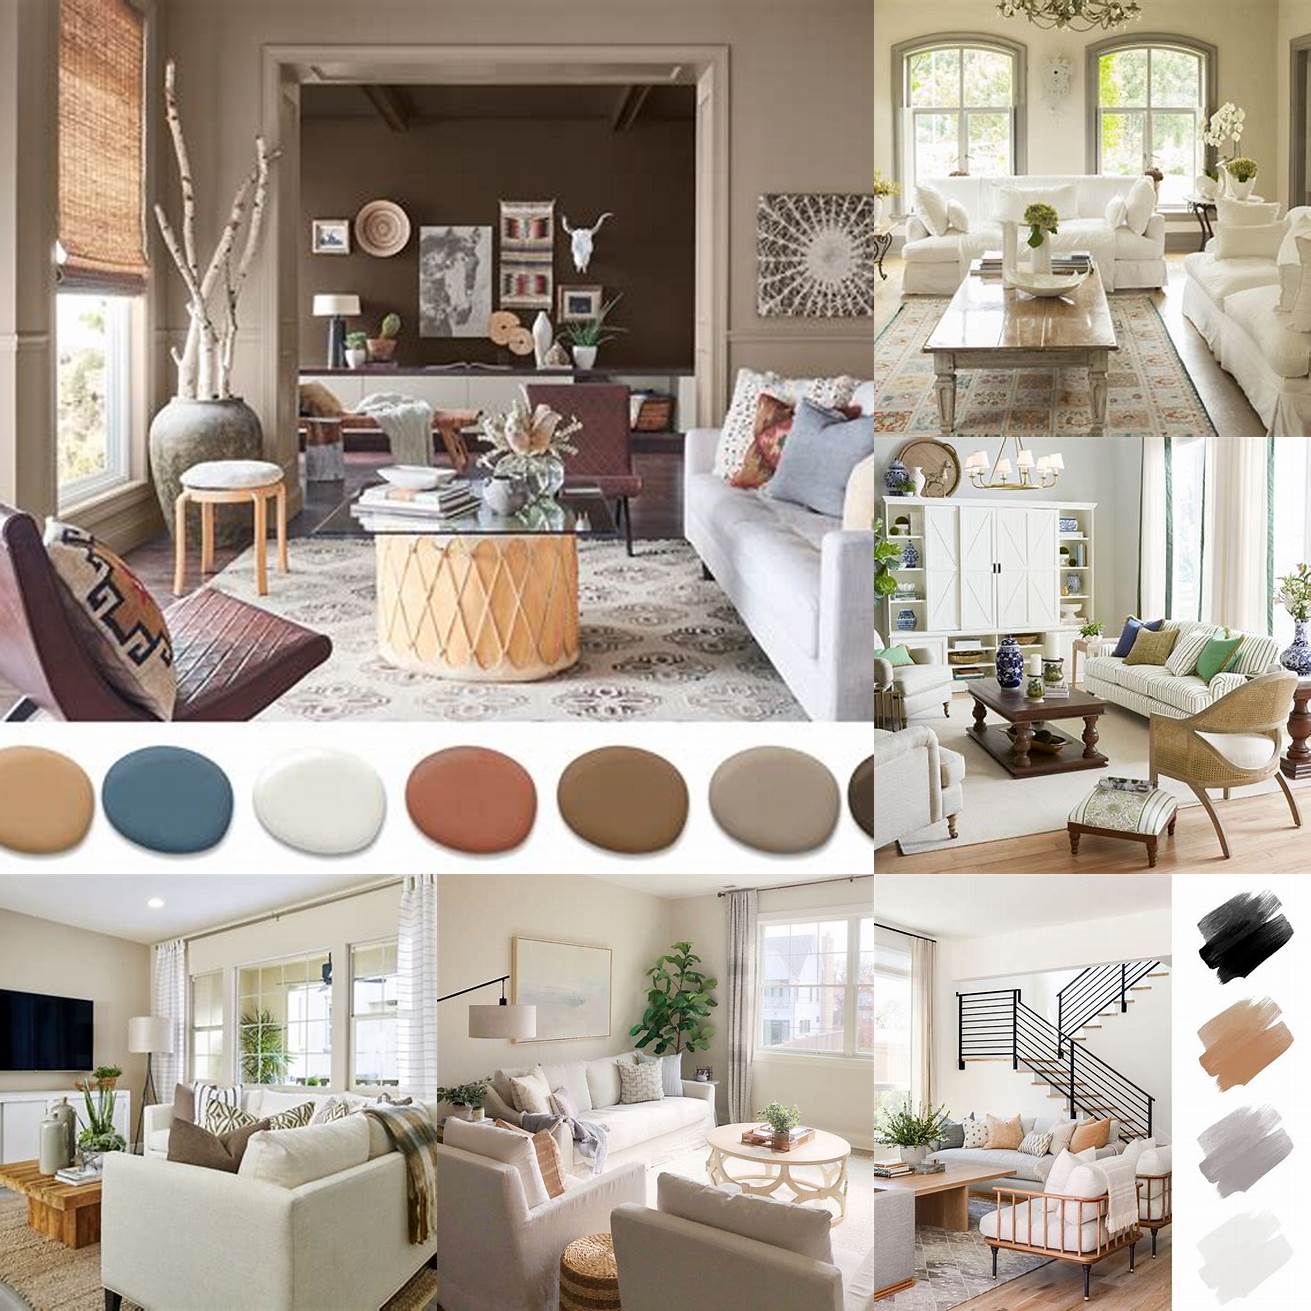 A neutral color palette and simple decor can still look cute and inviting